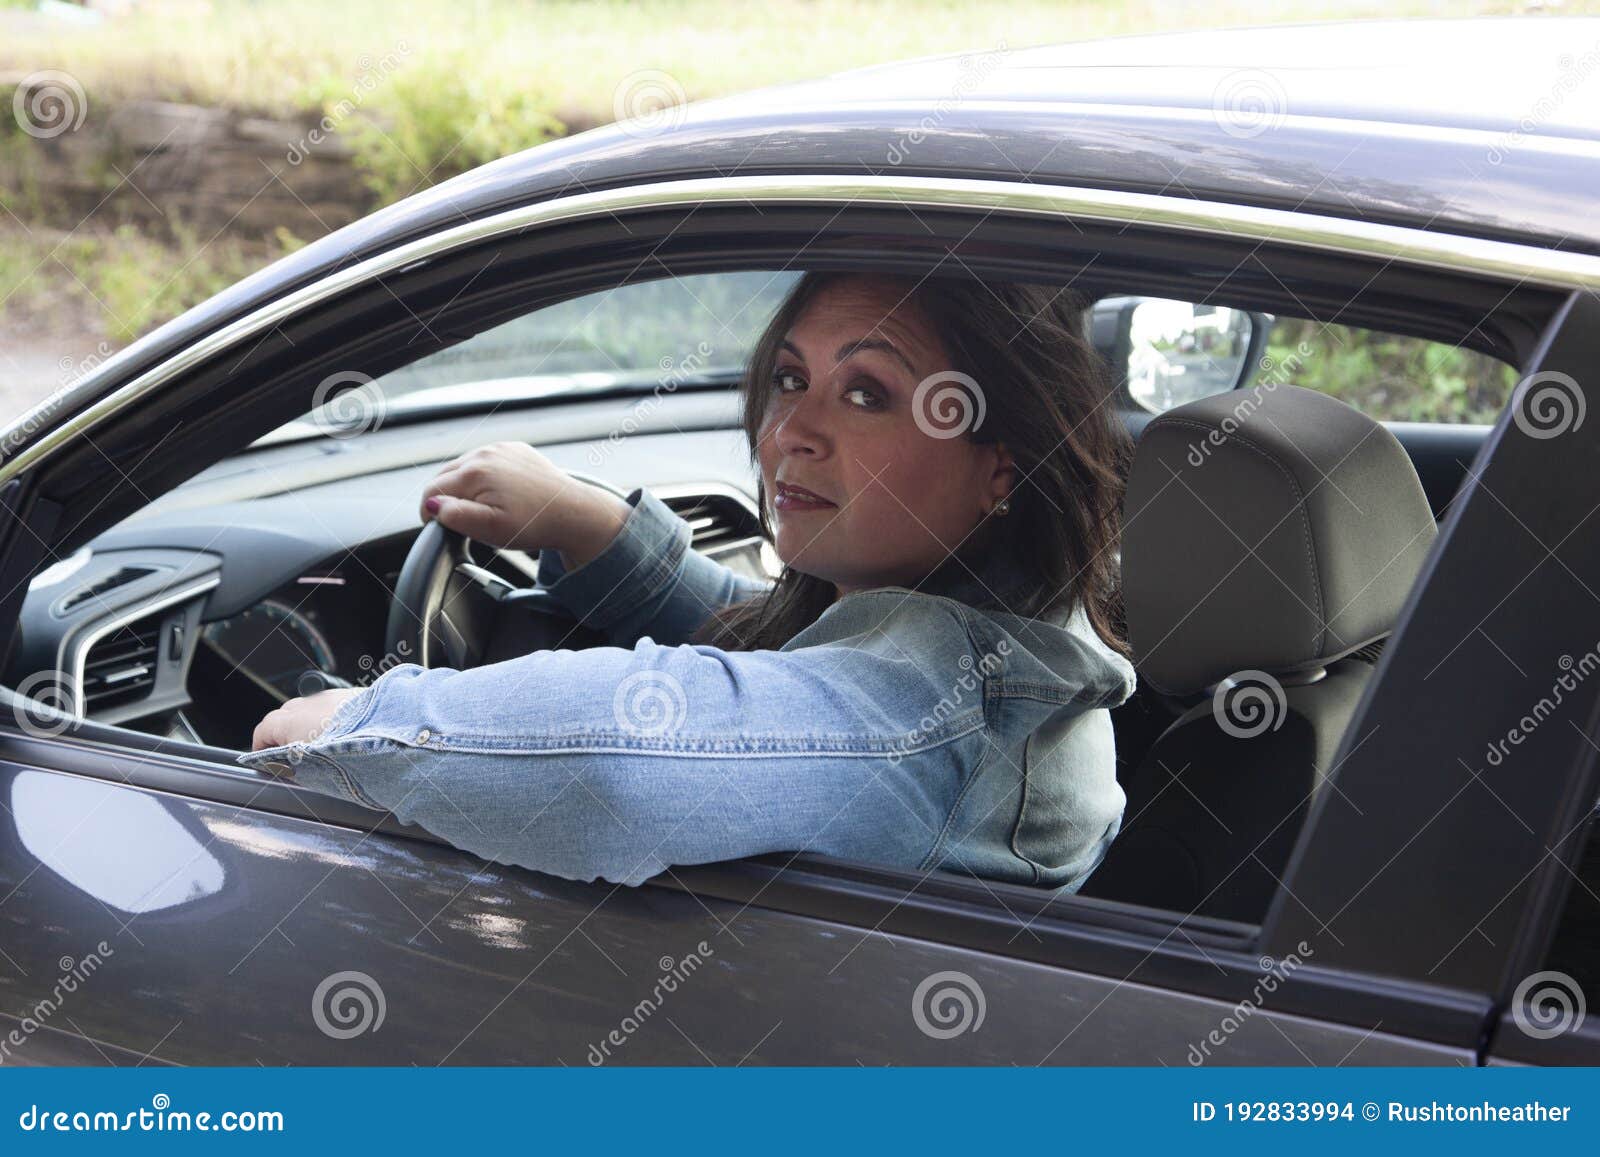 Beautiful Woman Relaxed in the Car Stock Photo - Image of steering ...